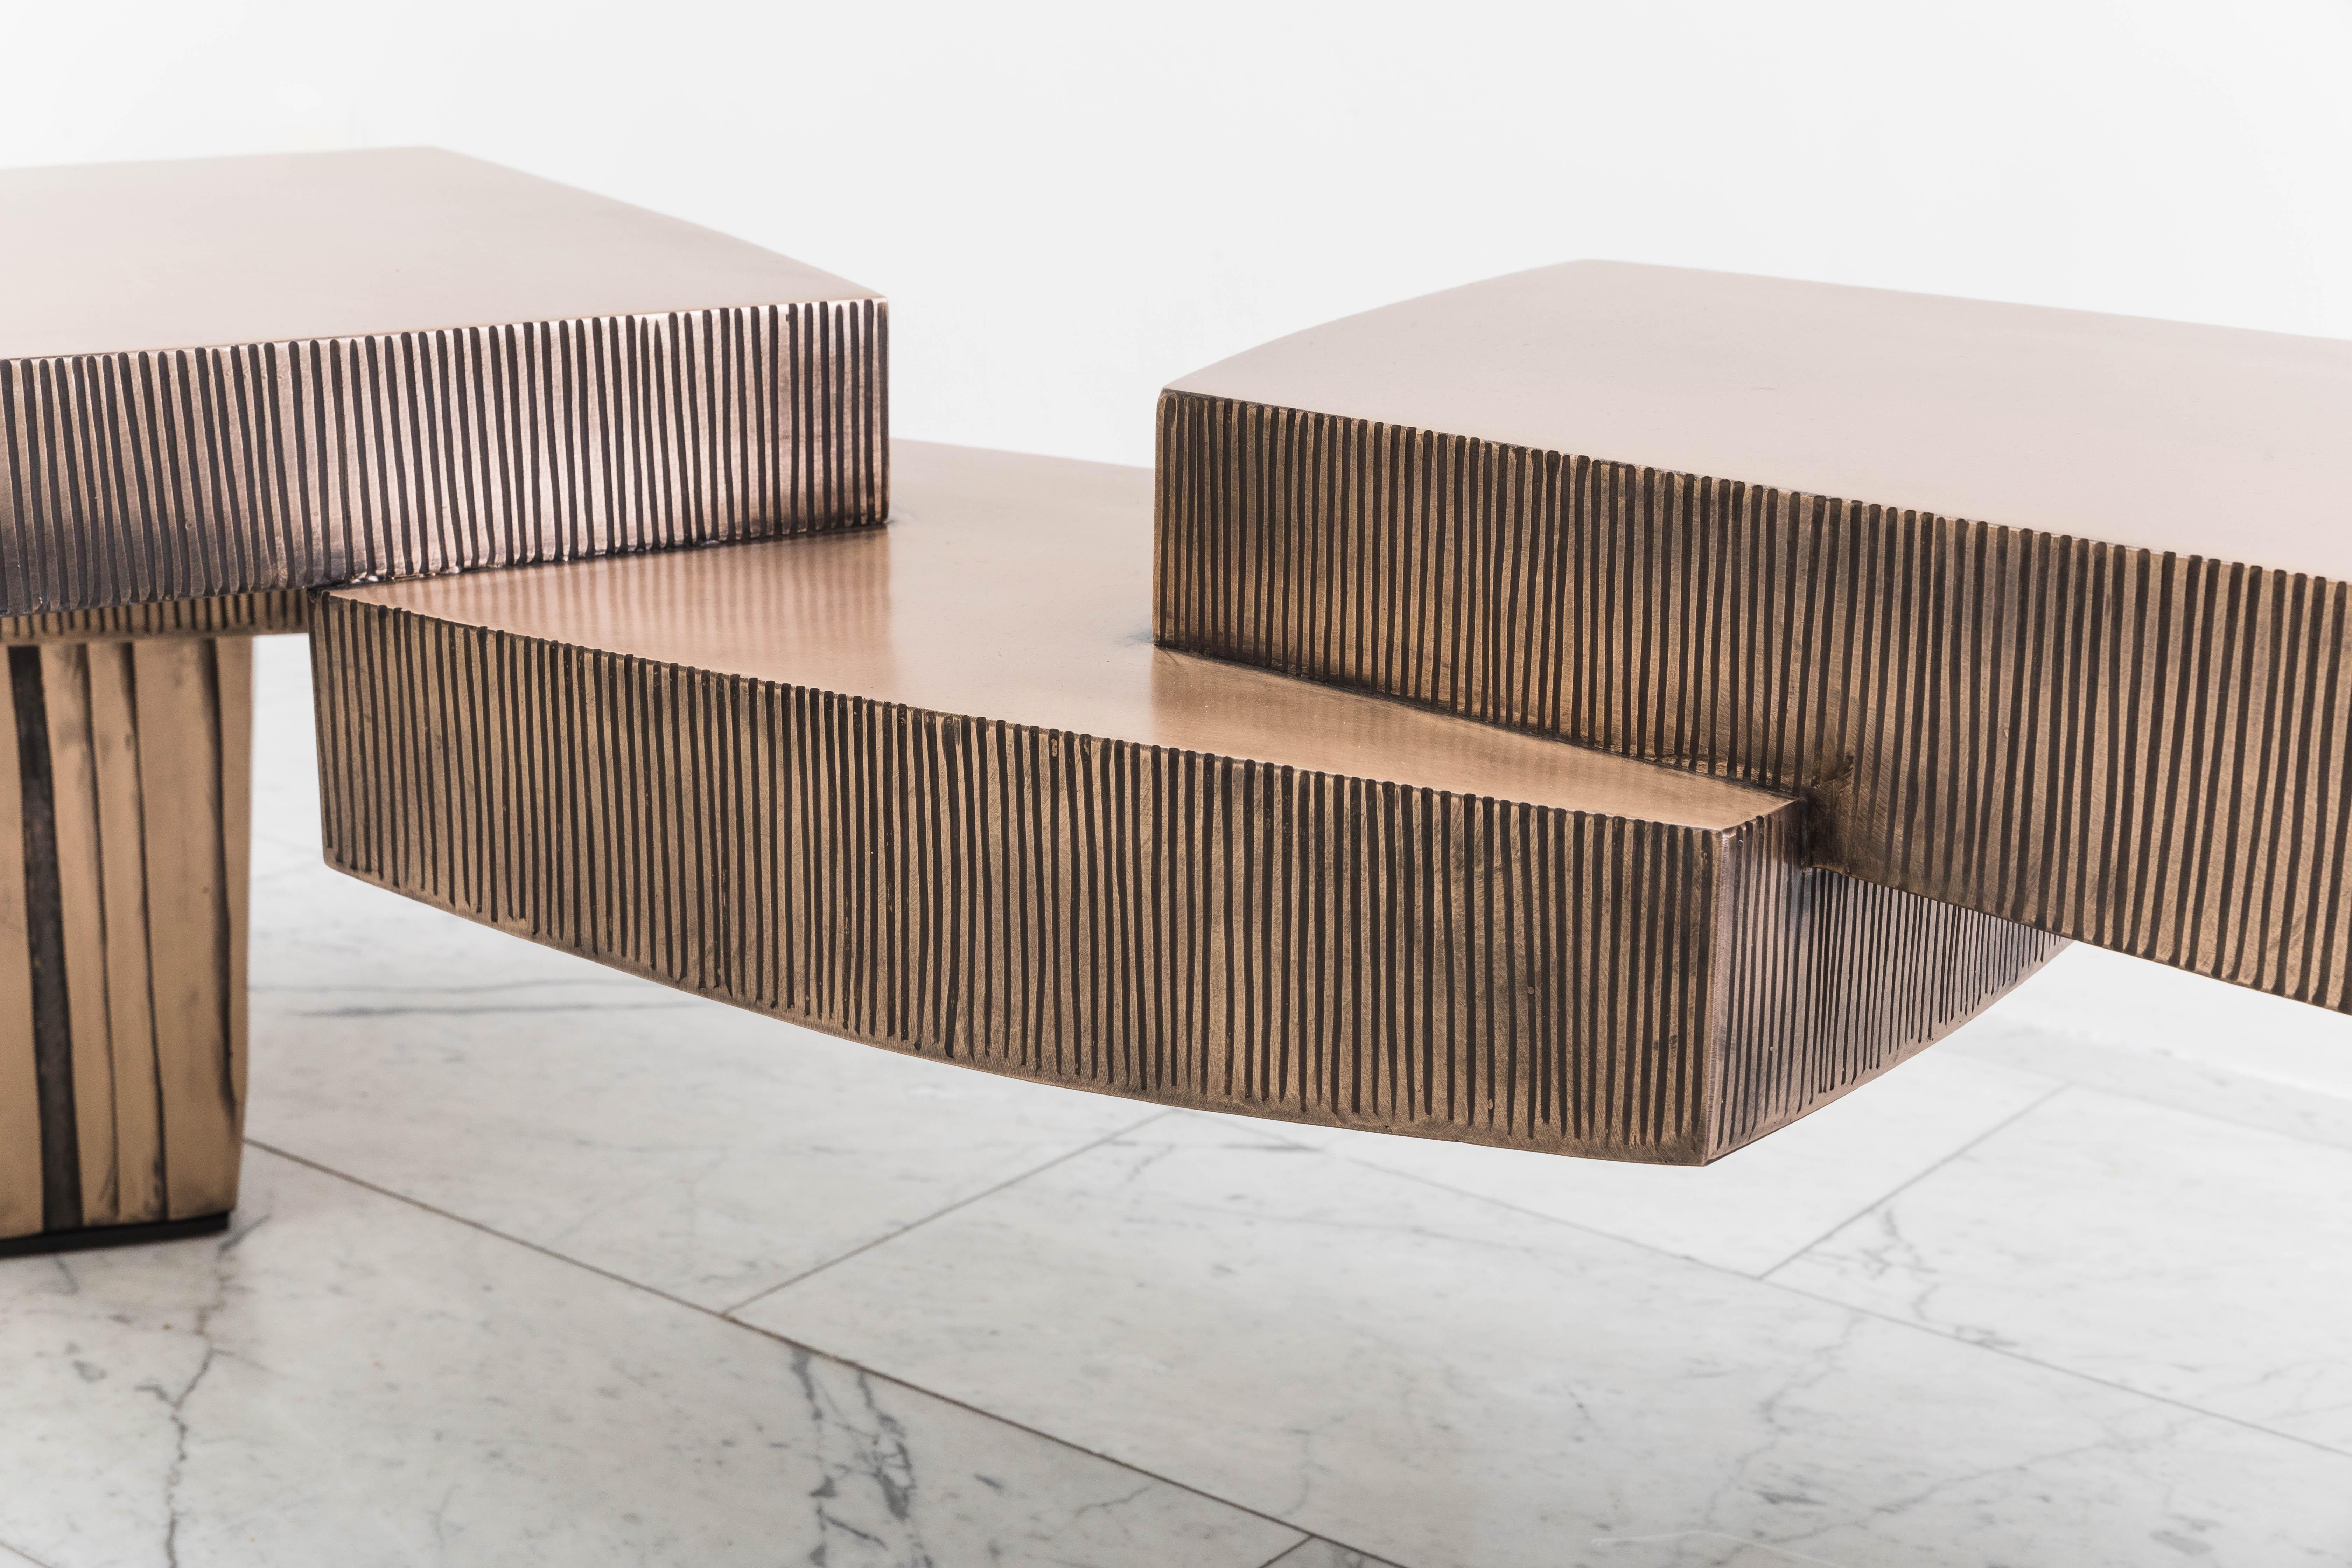 The II Ponte Bench (The Bridge) was inspired by Constructivism and Frank Lloyd Wright’s cantilevered homes, Gary Magakis channels architectural elements in his work. Though the table’s geometric sections appear to have sharp edges, they are actually